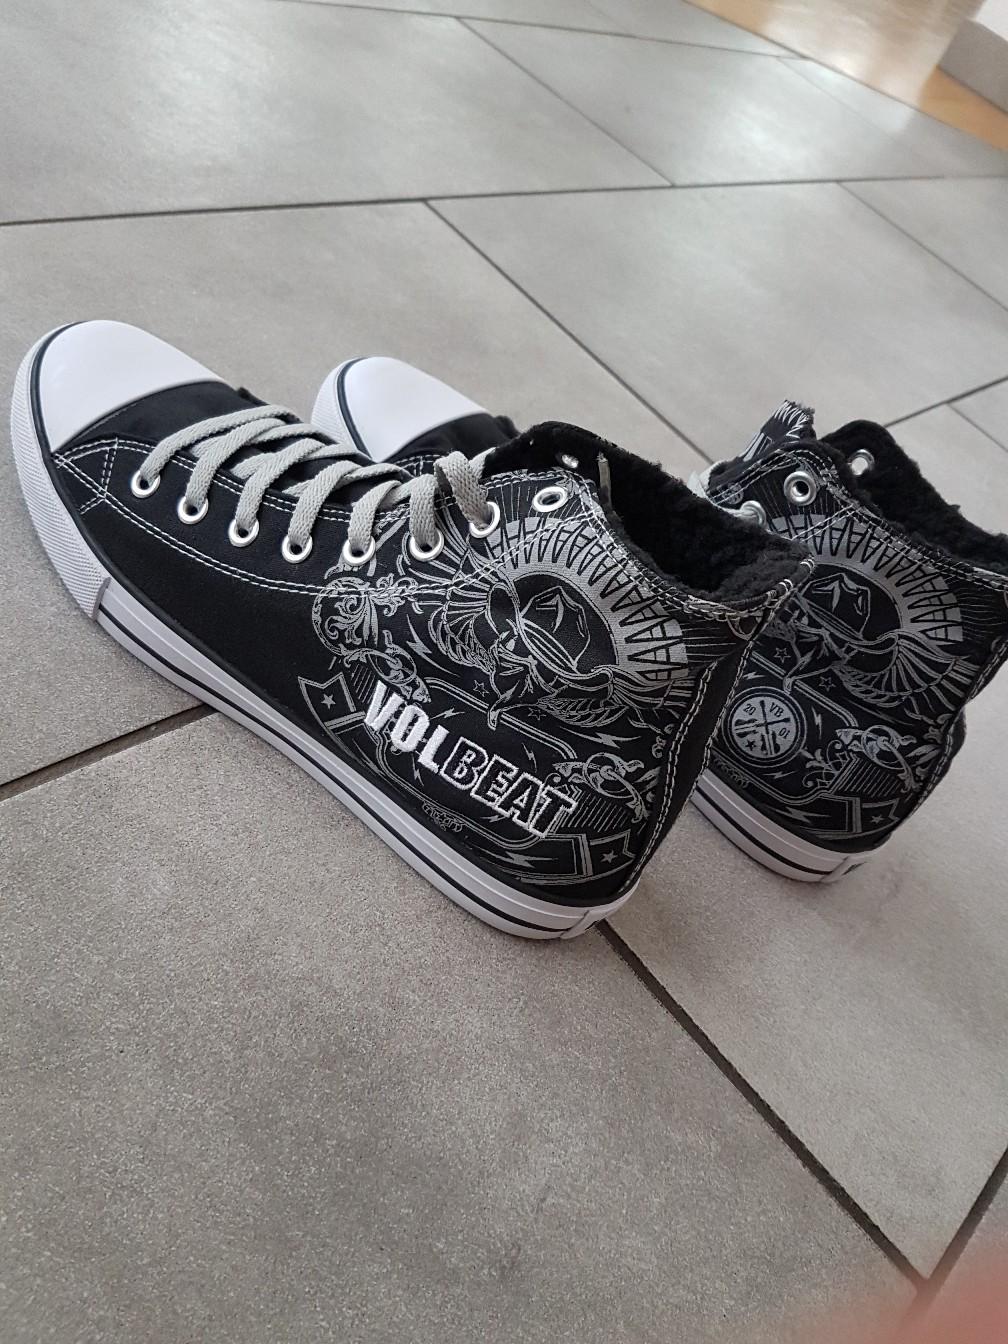 volbeat converse shoes